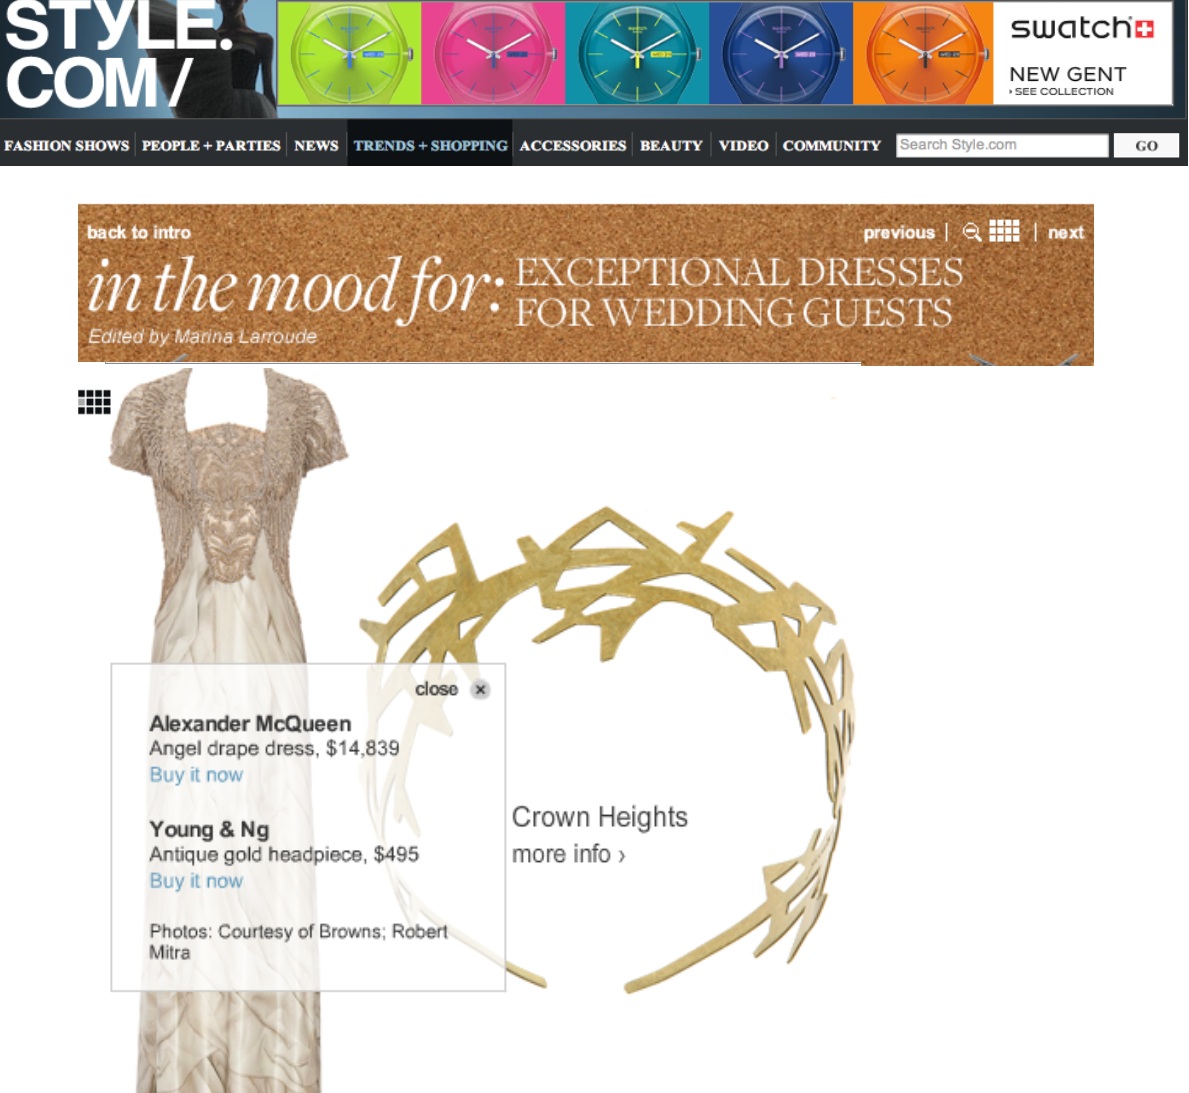 Style.com Features Young&ng Headpiece Paired with Alexander McQueen Dress